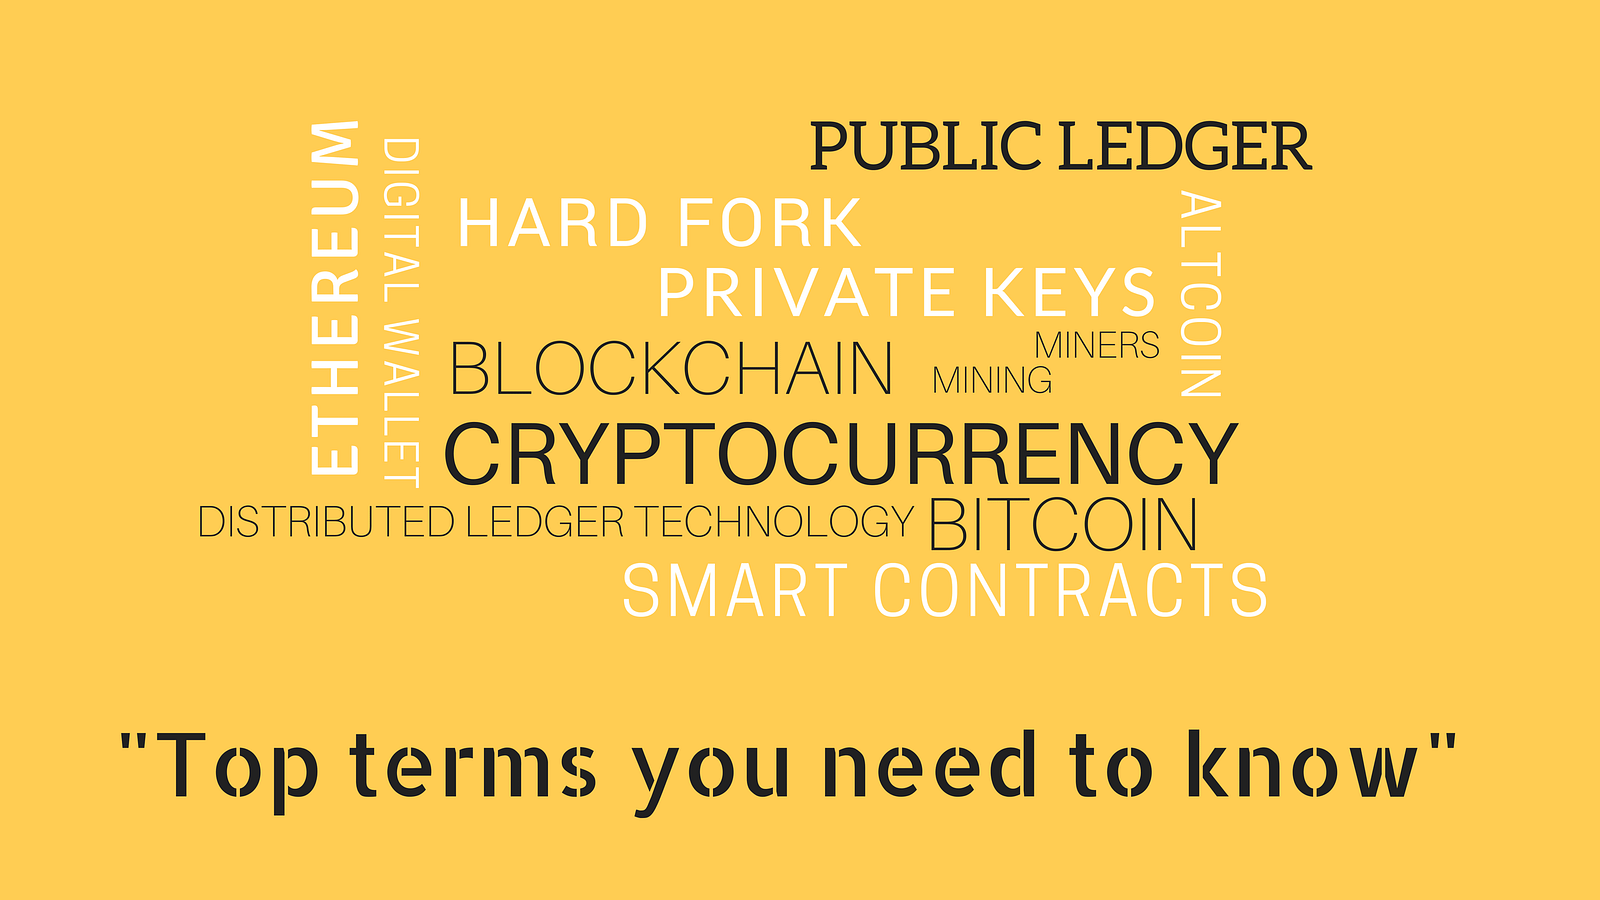 How to Find The Next Big Cryptocurrency?